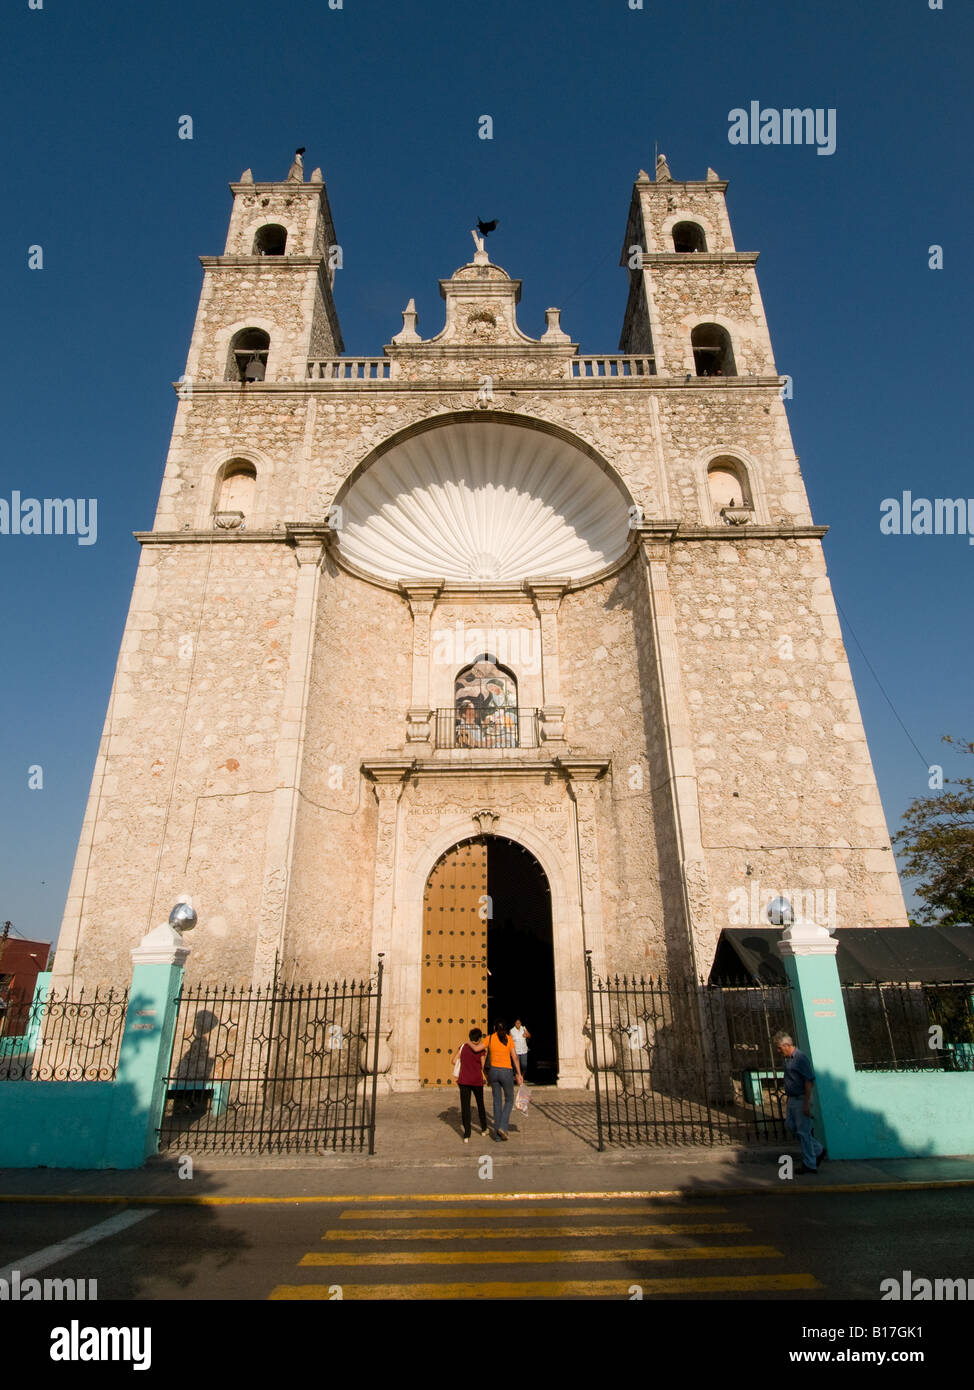 Spanish style church in Merida capital of the Yucatan state Mexico The first Spanish city built in this part of Mexico Stock Photo